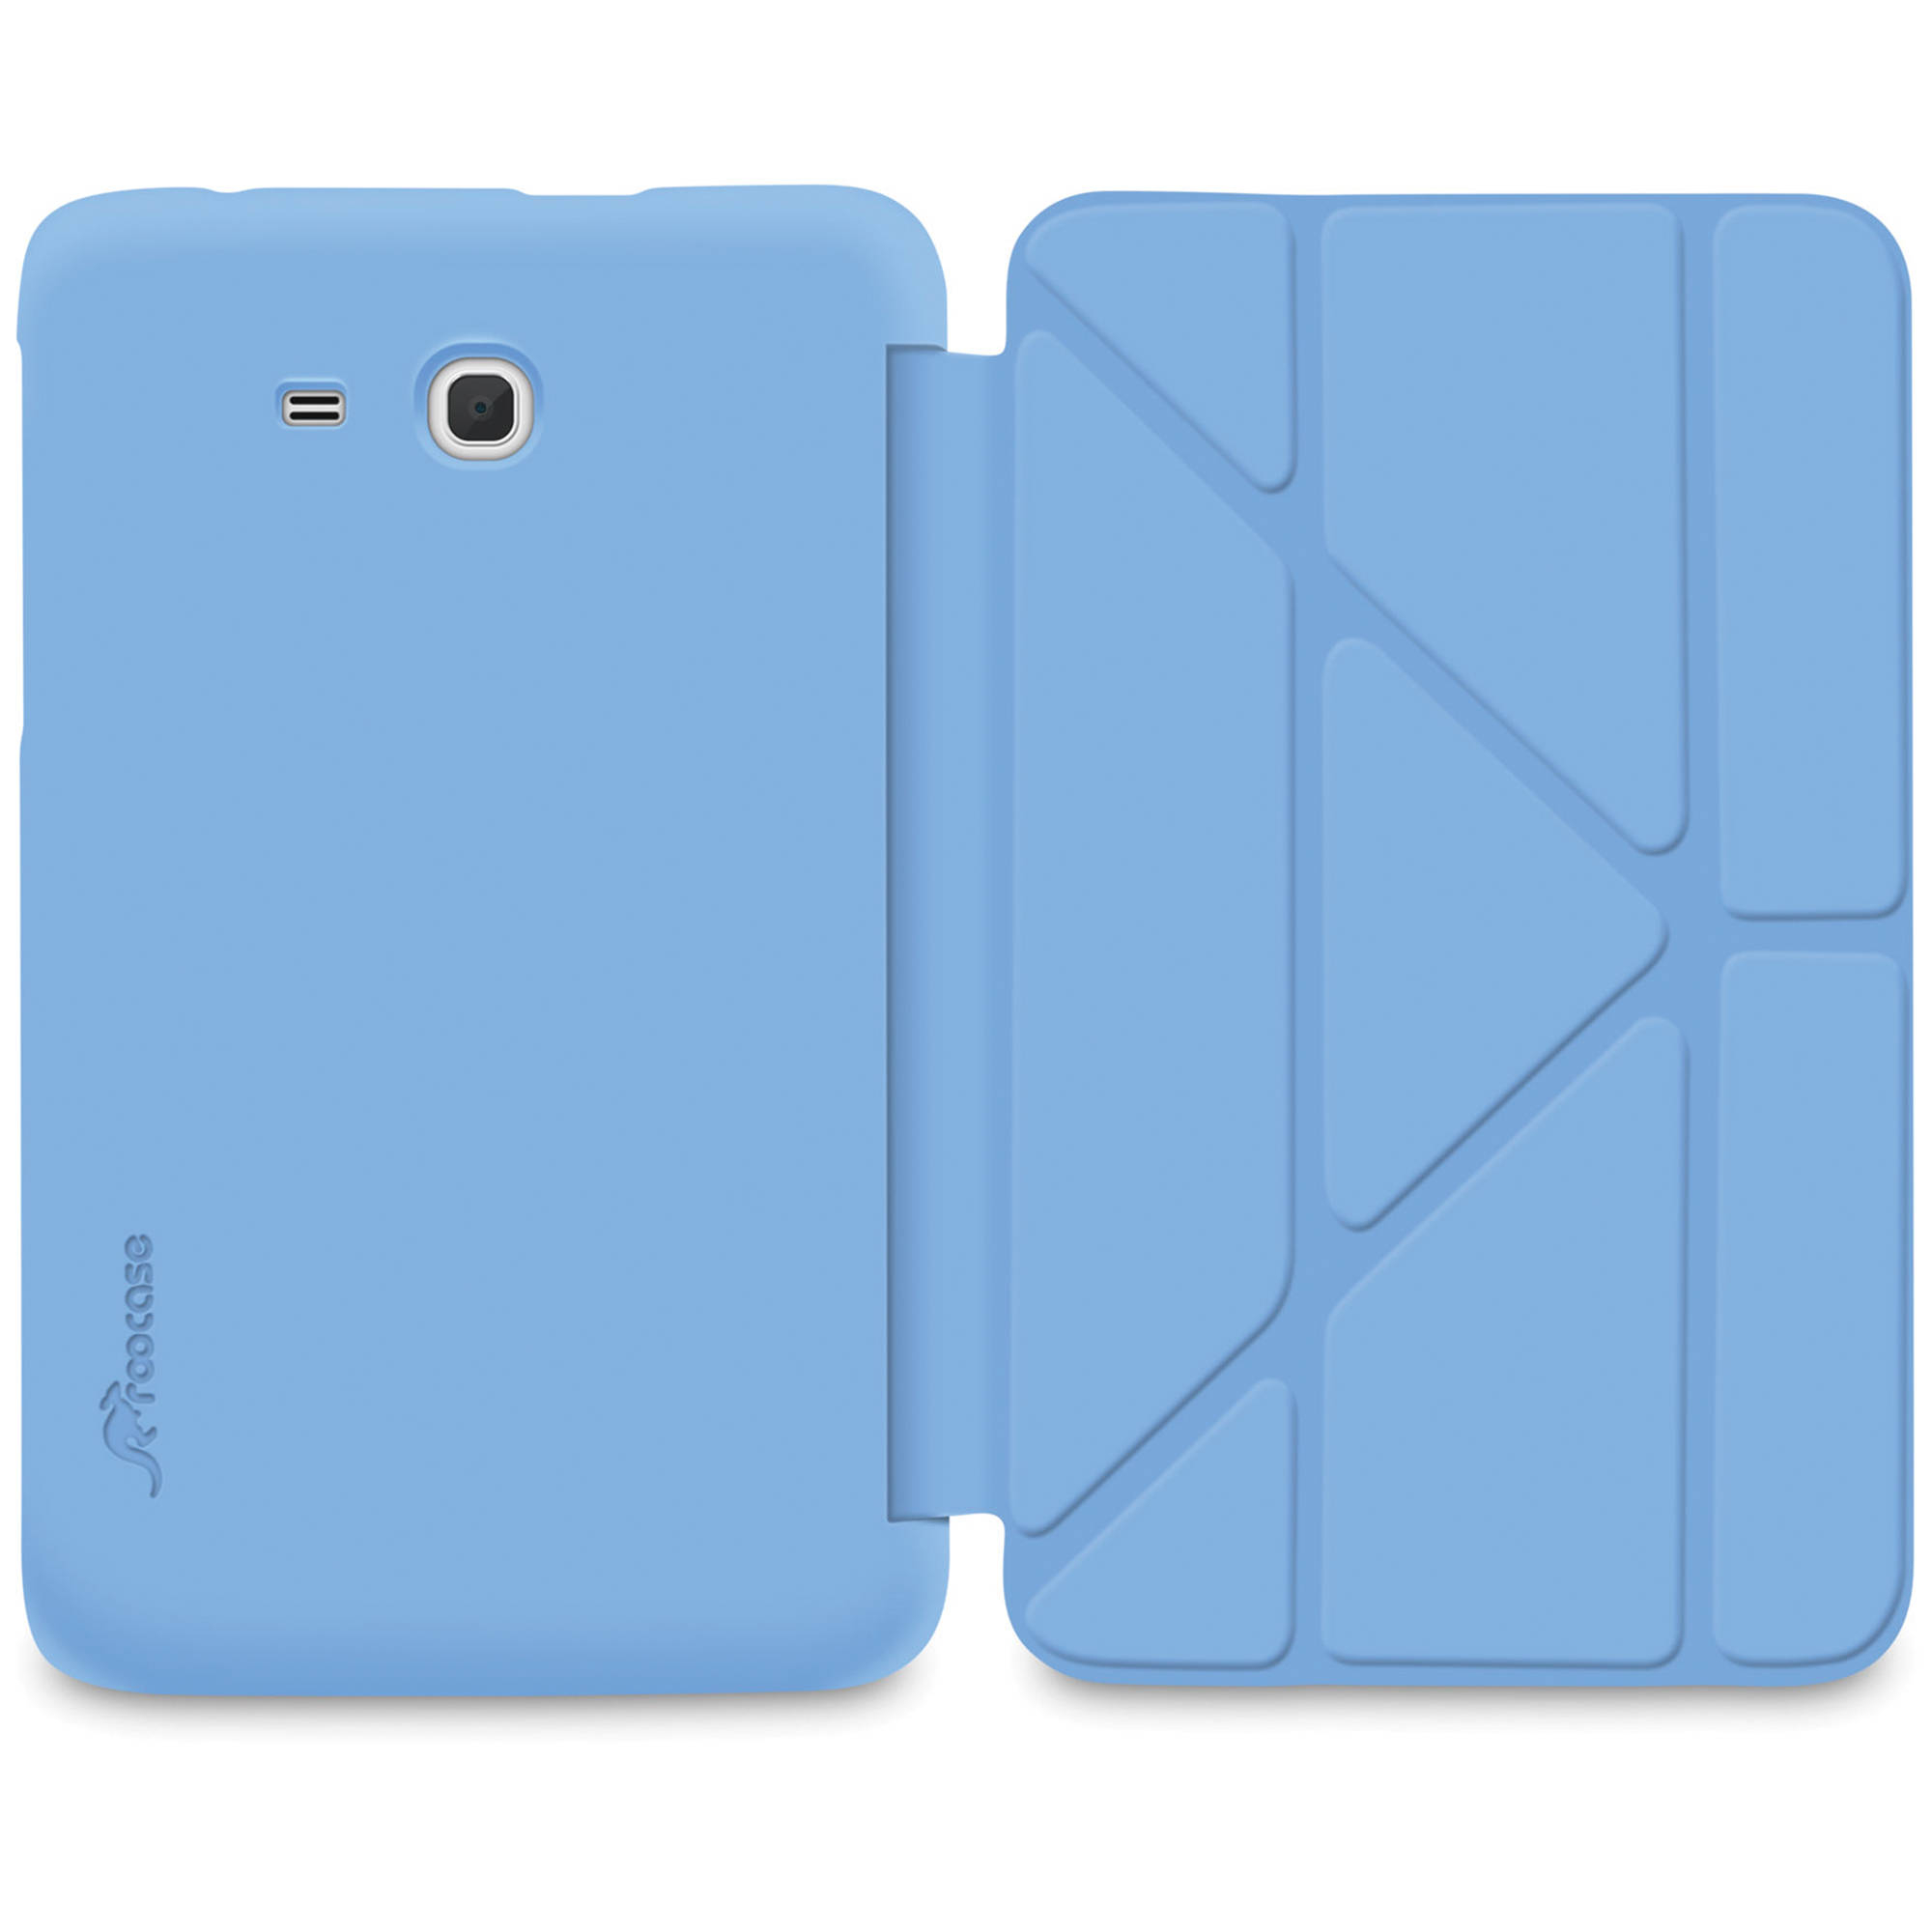 Origami Tablet Case Roocase Slim Shell Origami Case For Samsung Galaxy Tab 3 Lite 7 Tablet Blue